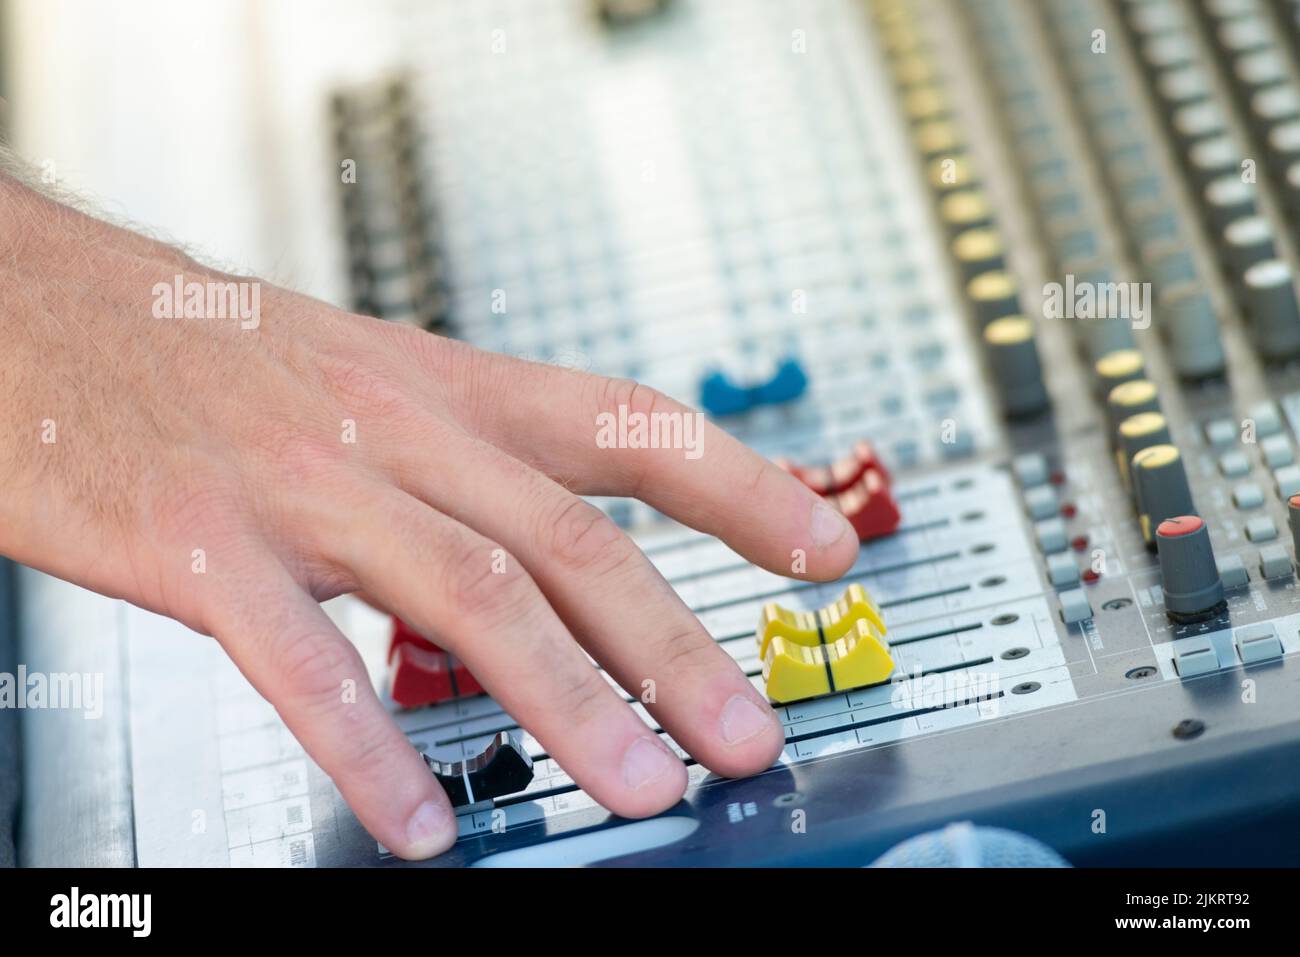 Sound Engineer Operating Professional Sound Mixer at Live Concert, Hand Stock Photo